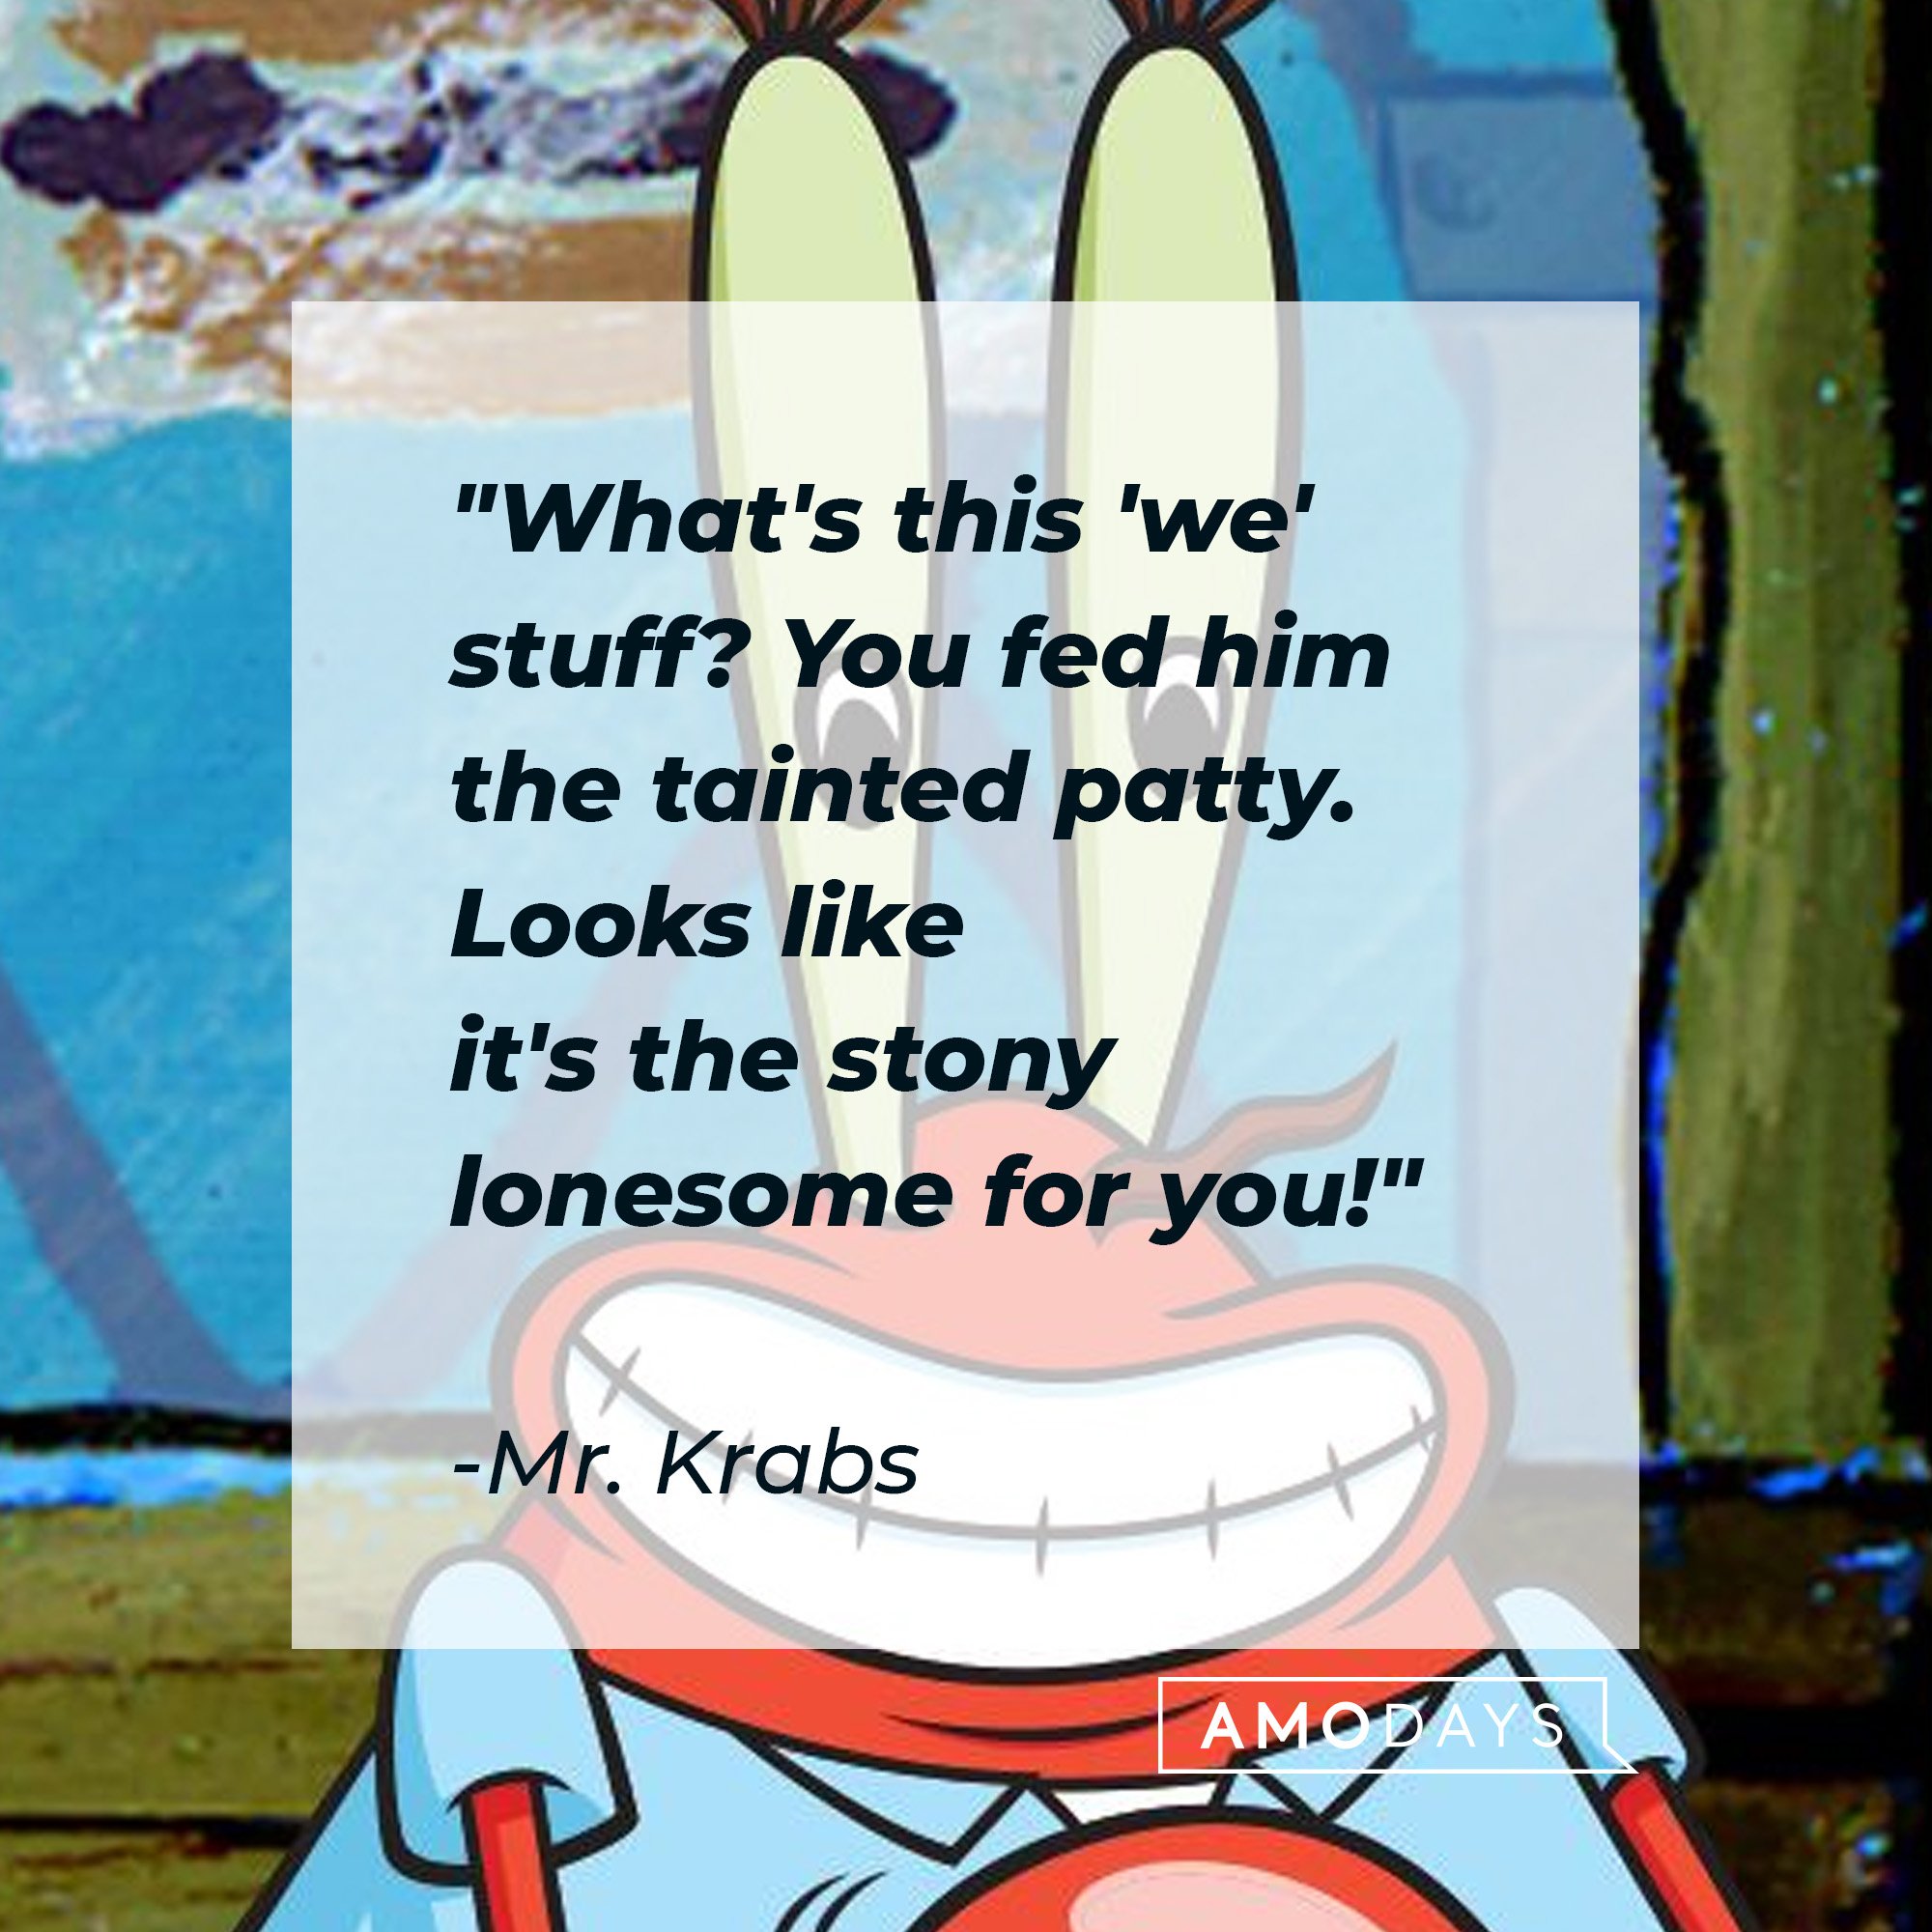 Mr. Krabs's quote: "What's this 'we' stuff? You fed him the tainted patty. Looks like it's the stony lonesome for you!" | Image: AmoDays 